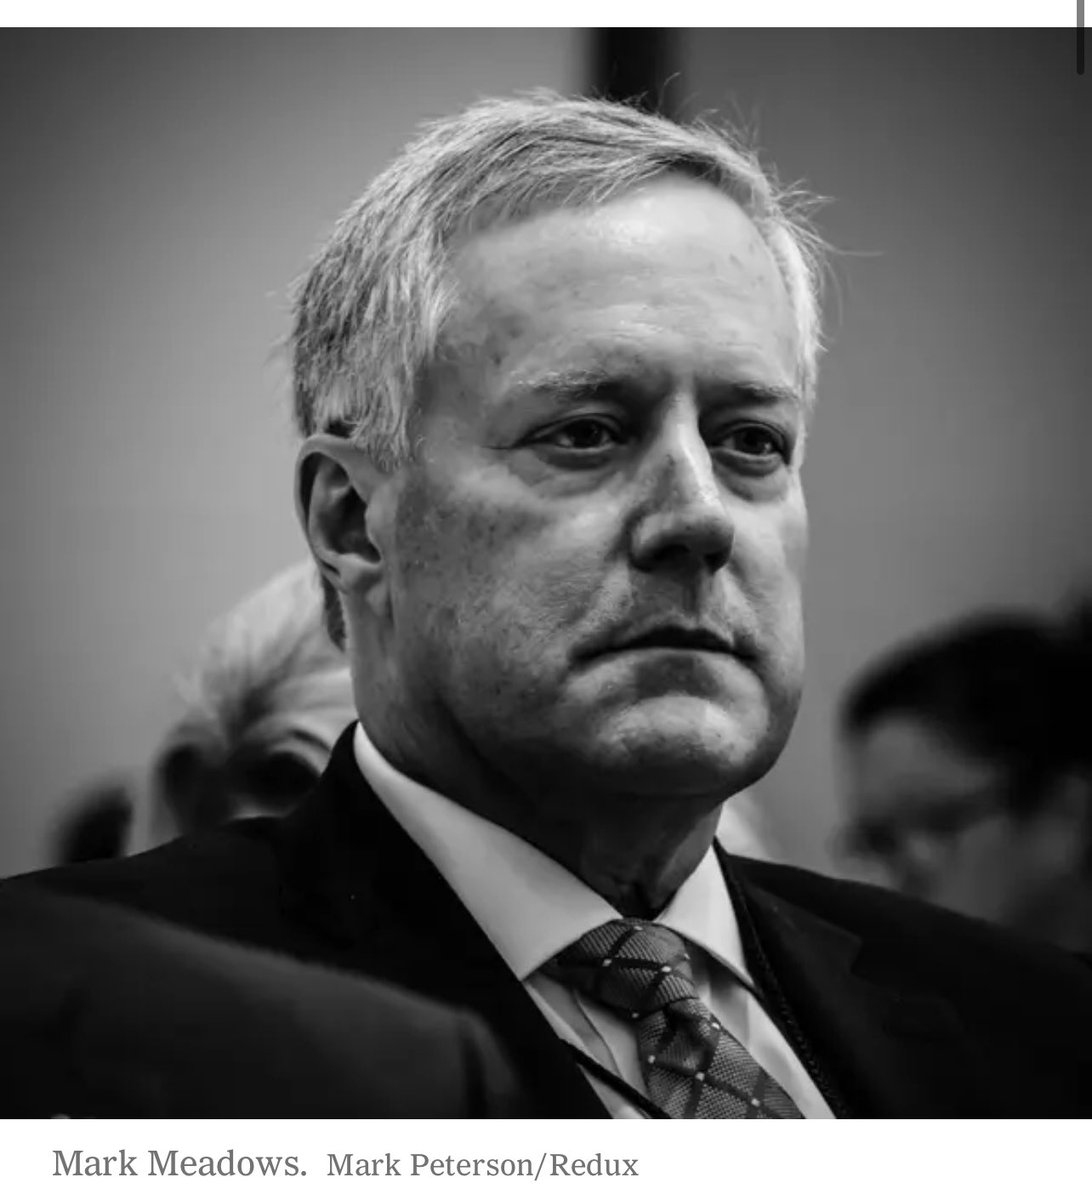 Mark Meadows would probably still be a happy little Congressman, if he hadn’t decided to work for Donald Trump.
Jenna Ellis could still be a crappy traffic court attorney who never got Covid via Rudy Giuliani fart, if she hadn’t decided to work for Donald Trump.
Walt Nauta could